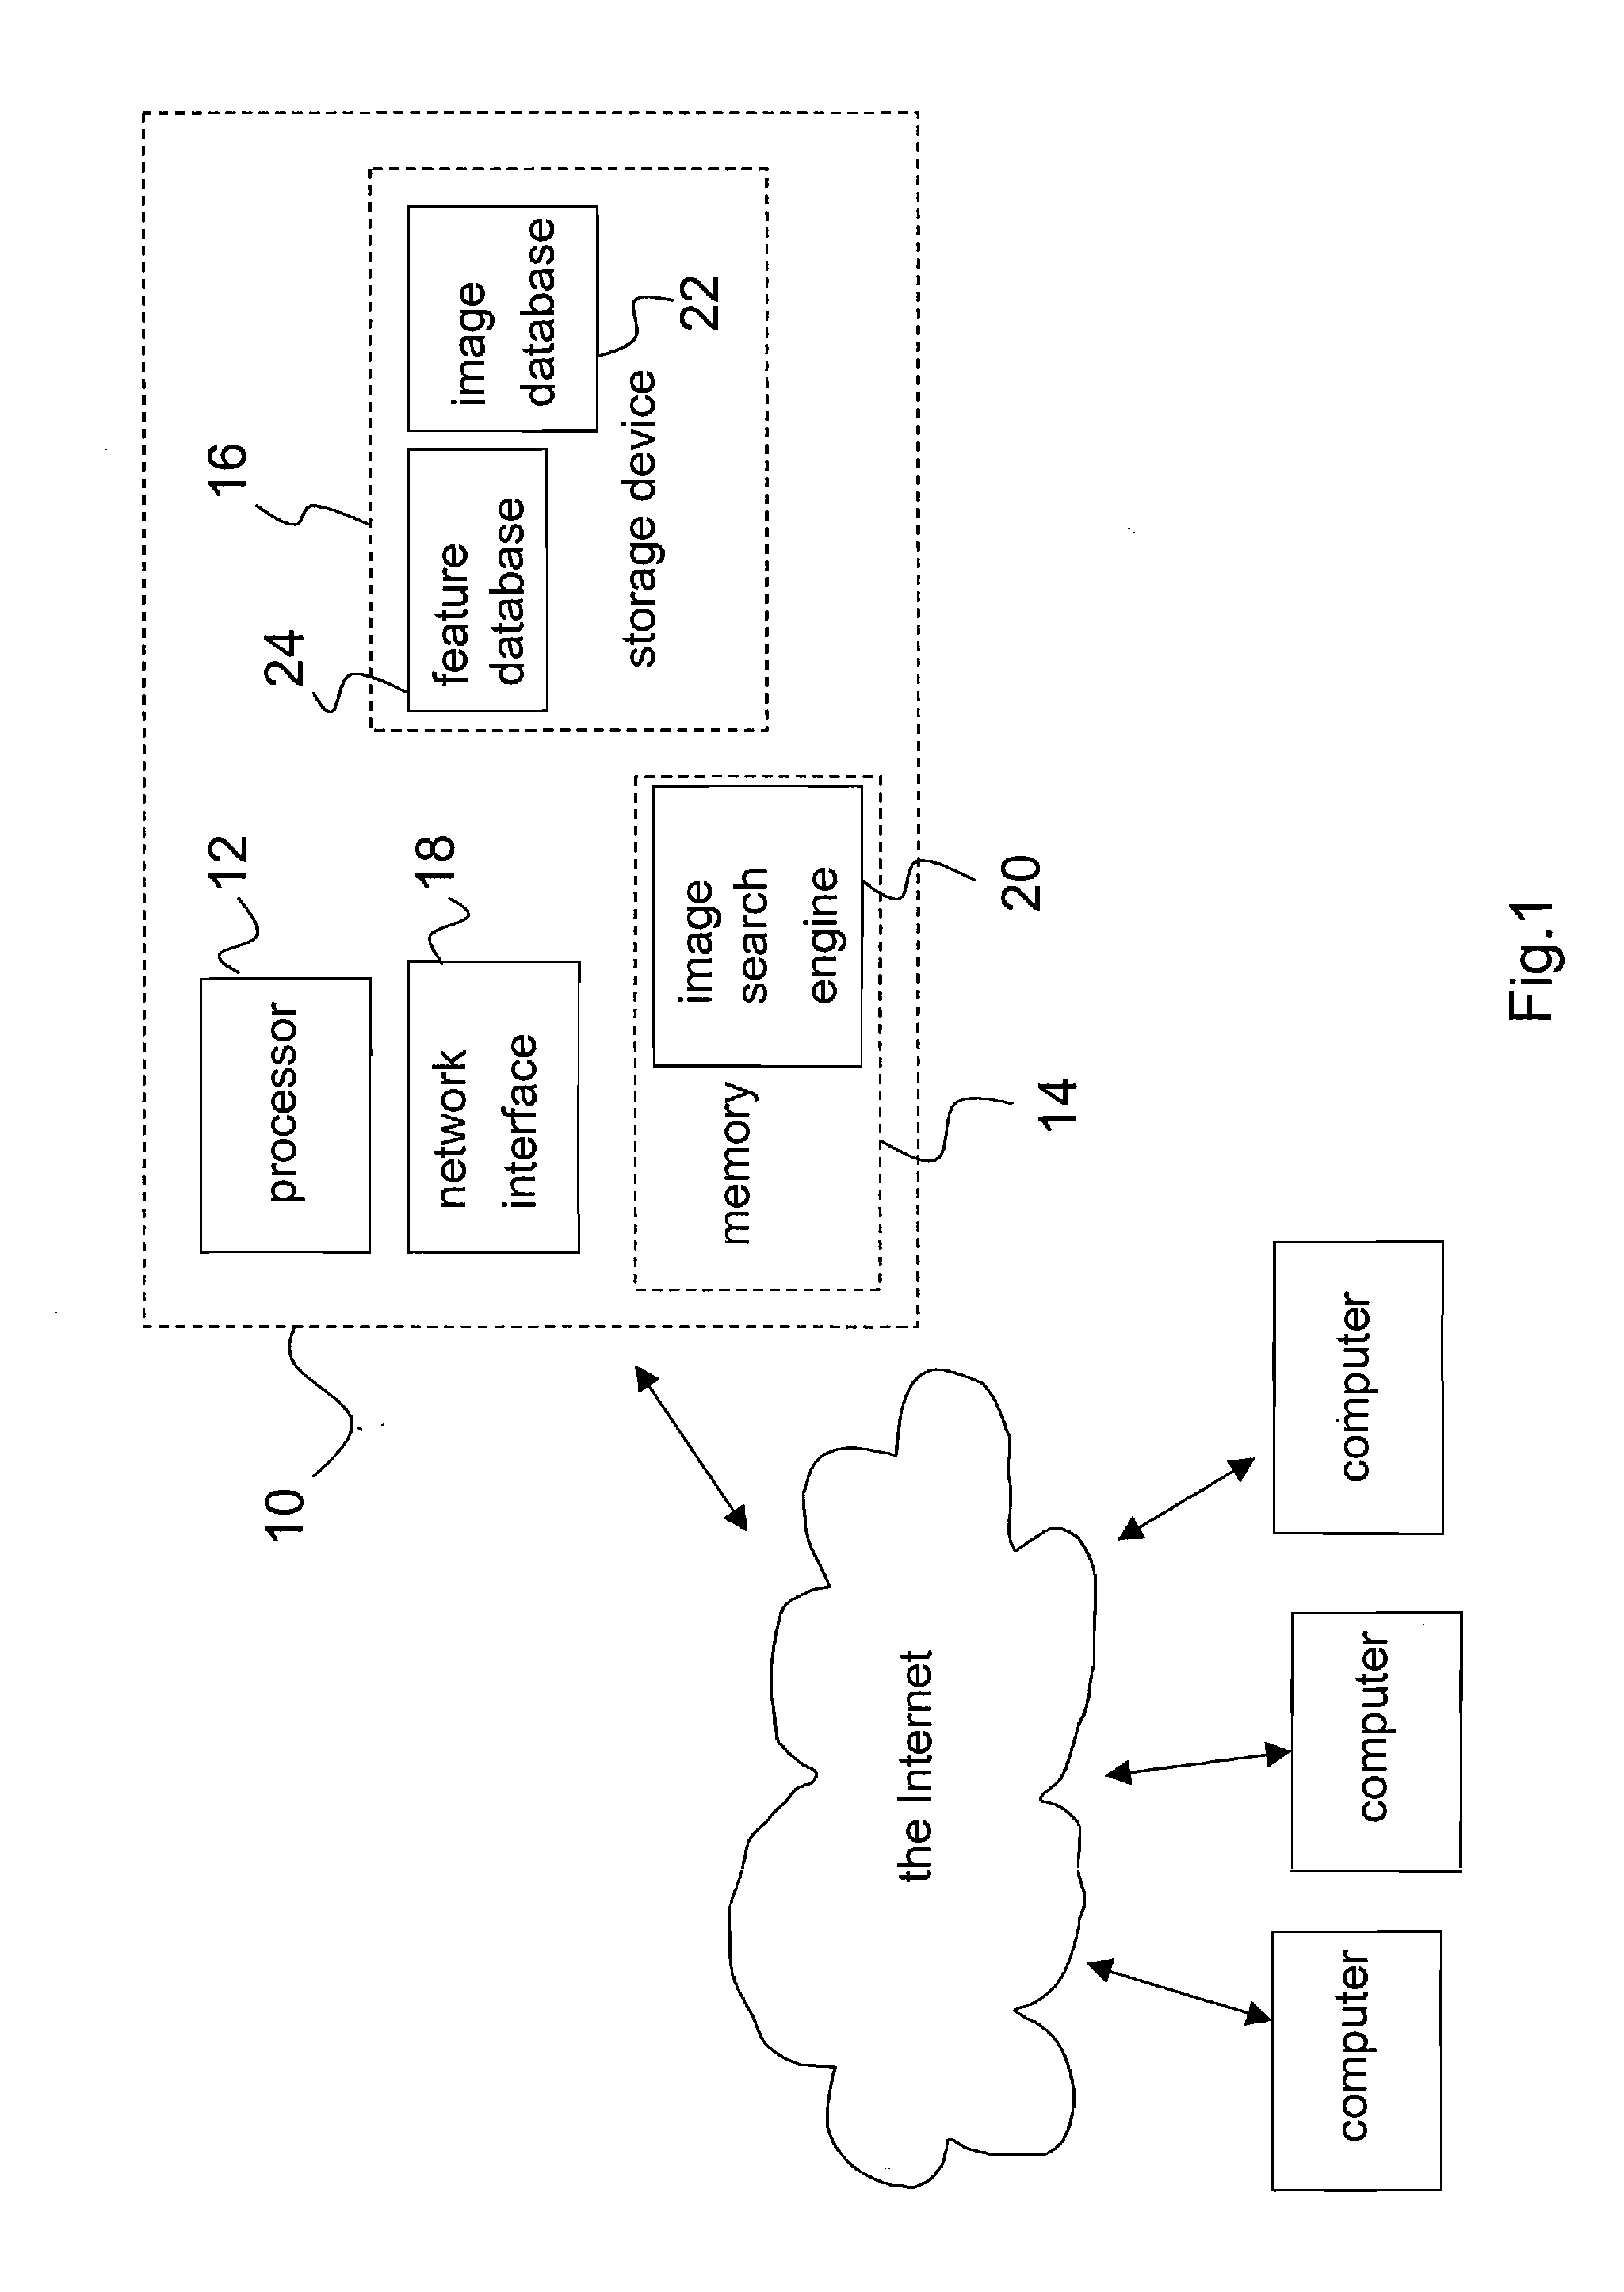 Object-based image search system and method